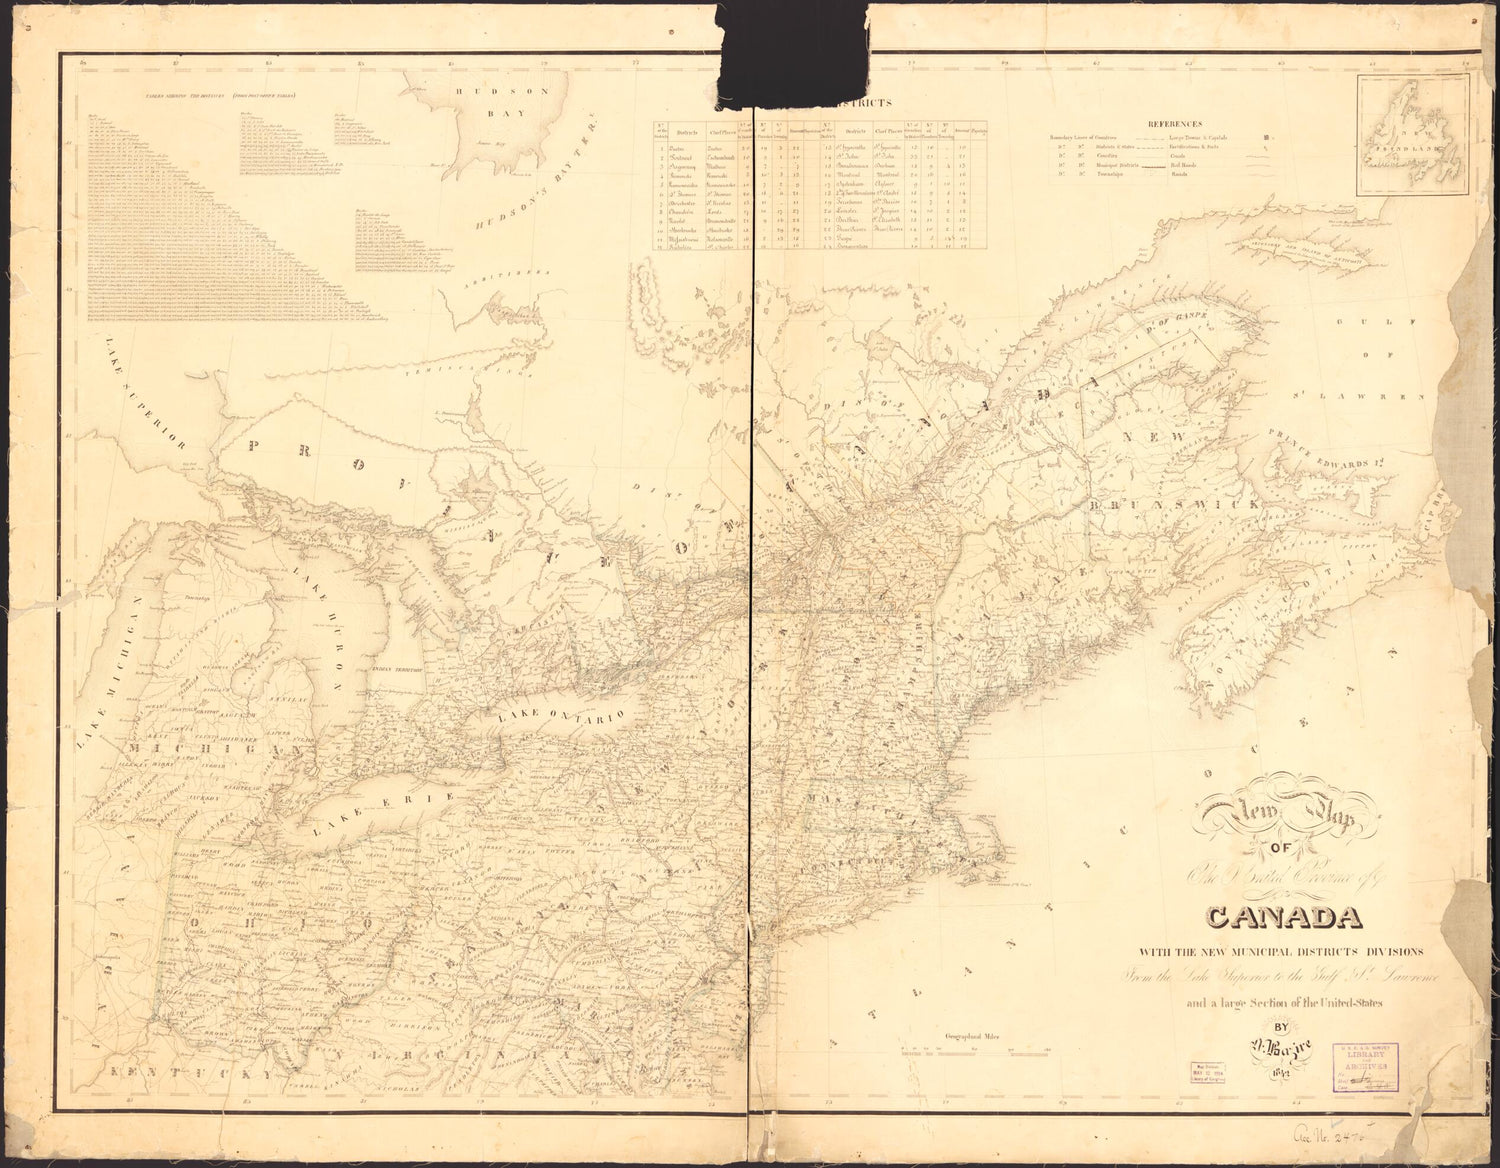 This old map of New Map of the United Provinces of Canada : With the New Municipal Districts Divisions from the Lake Superior to the Gulf of St. Lawrence and a Large Section of the United States from 1842 was created by N. Bazire in 1842